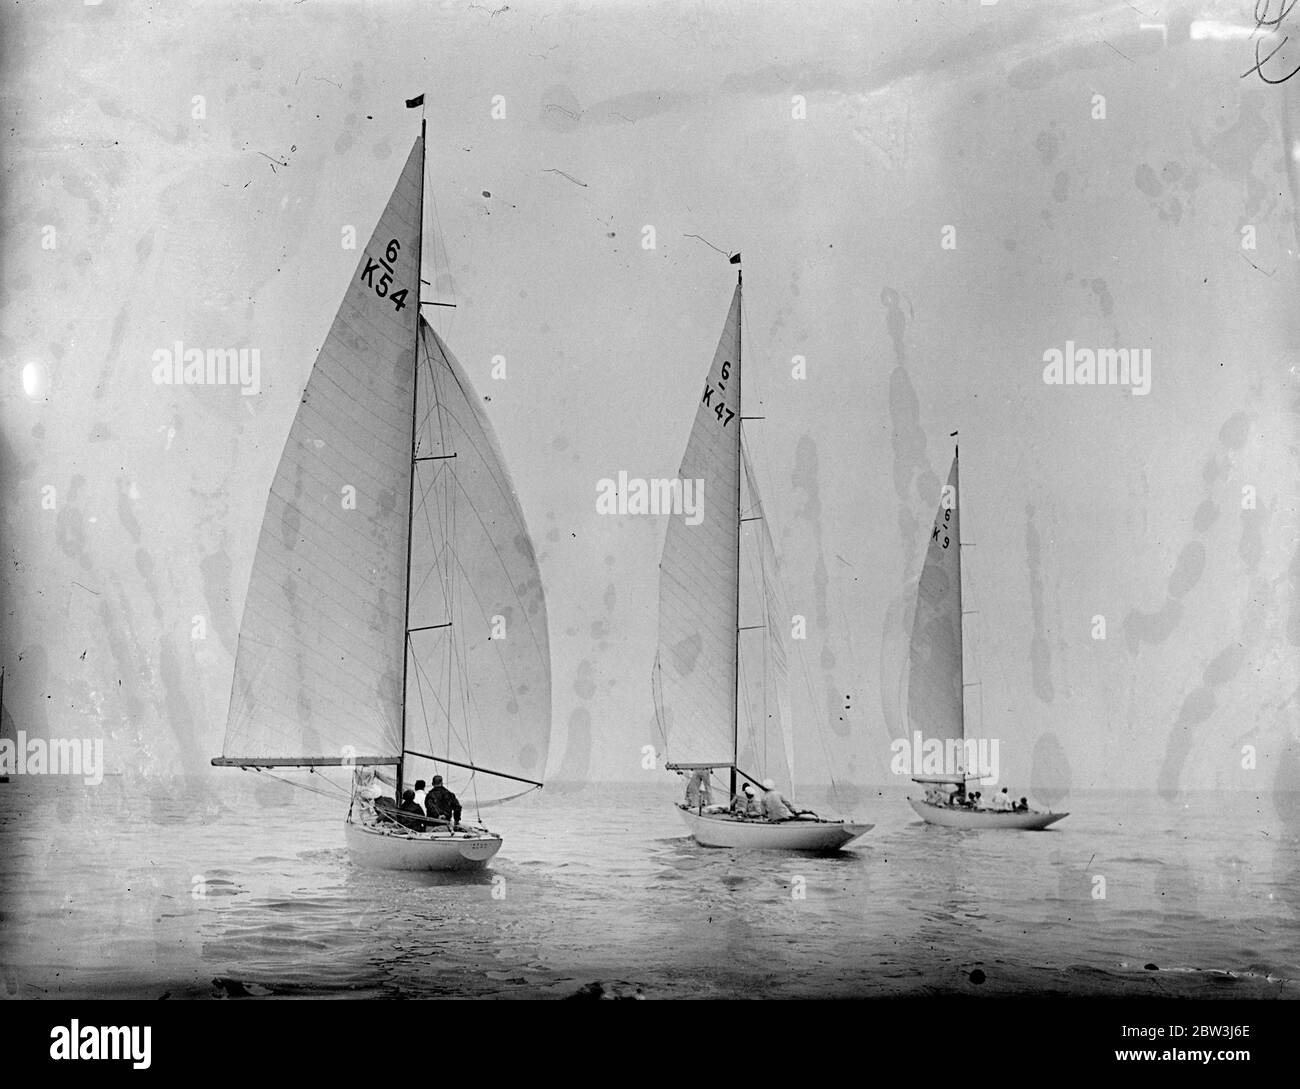 Yachts compete in Olympic games trials at Burnham on Crouch . The Olympic Games eliminating trials for six meter , monotype and star class yachts held under the suspices of the Royal Corinthian Yacht Club , took place at Burnham on Crouch , Essex . The races are being held to choose the best representatives among those entered to race at Kiel in the August Olympic games . Photo shows , sails billowing , Catherine ( H 47 ) owned by J D C Ewigg and H Ryan and Kyle ( K 54 ) F S Spriggs and Nona ( K 9 ) owned by F G Mitchell competing in the six meter class . 13 May 1936 Stock Photo